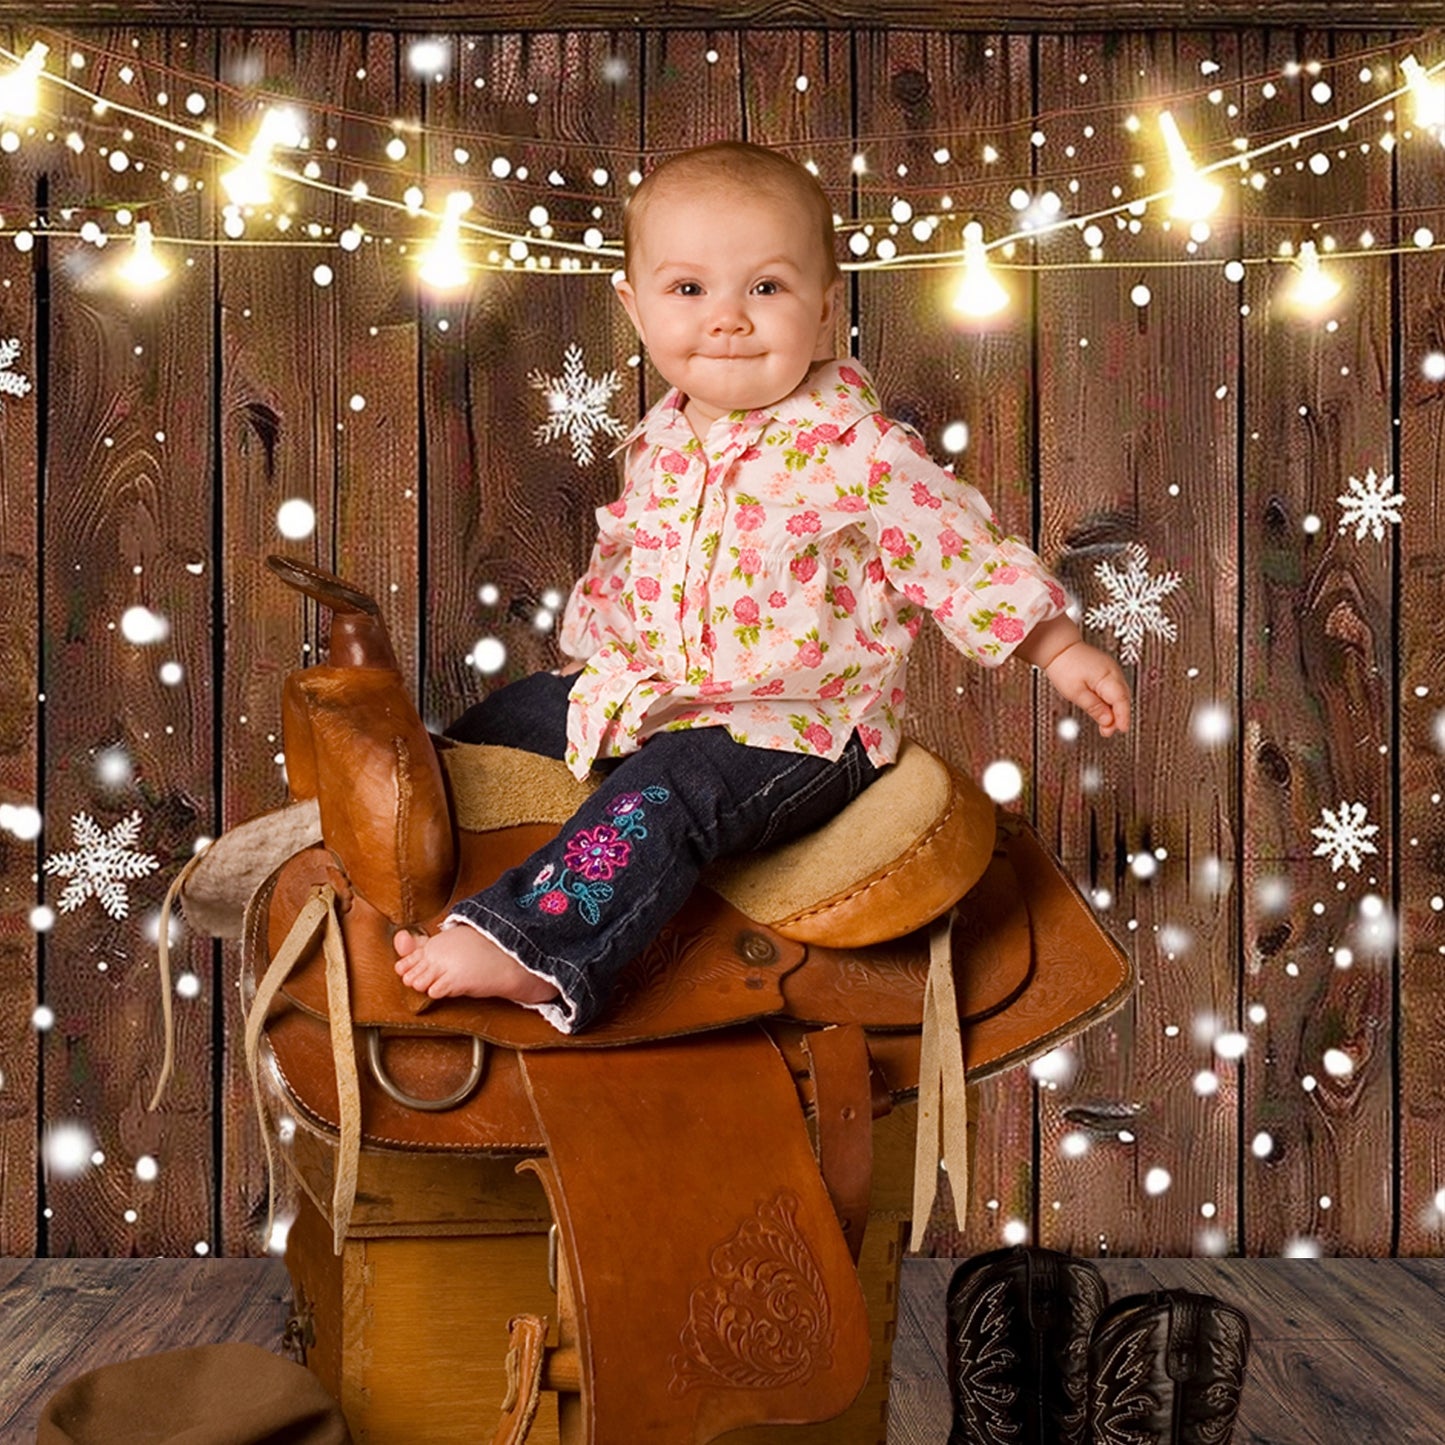 A baby sits on a saddle, wearing a floral shirt and jeans, in front of an ideasbackdrop Rustic Glitter Background Wood Backdrop. There are wintery string lights and snowflake decorations in the background. Cowboy boots are placed on the floor next to the saddle, adding to the vintage design charm of the scene.